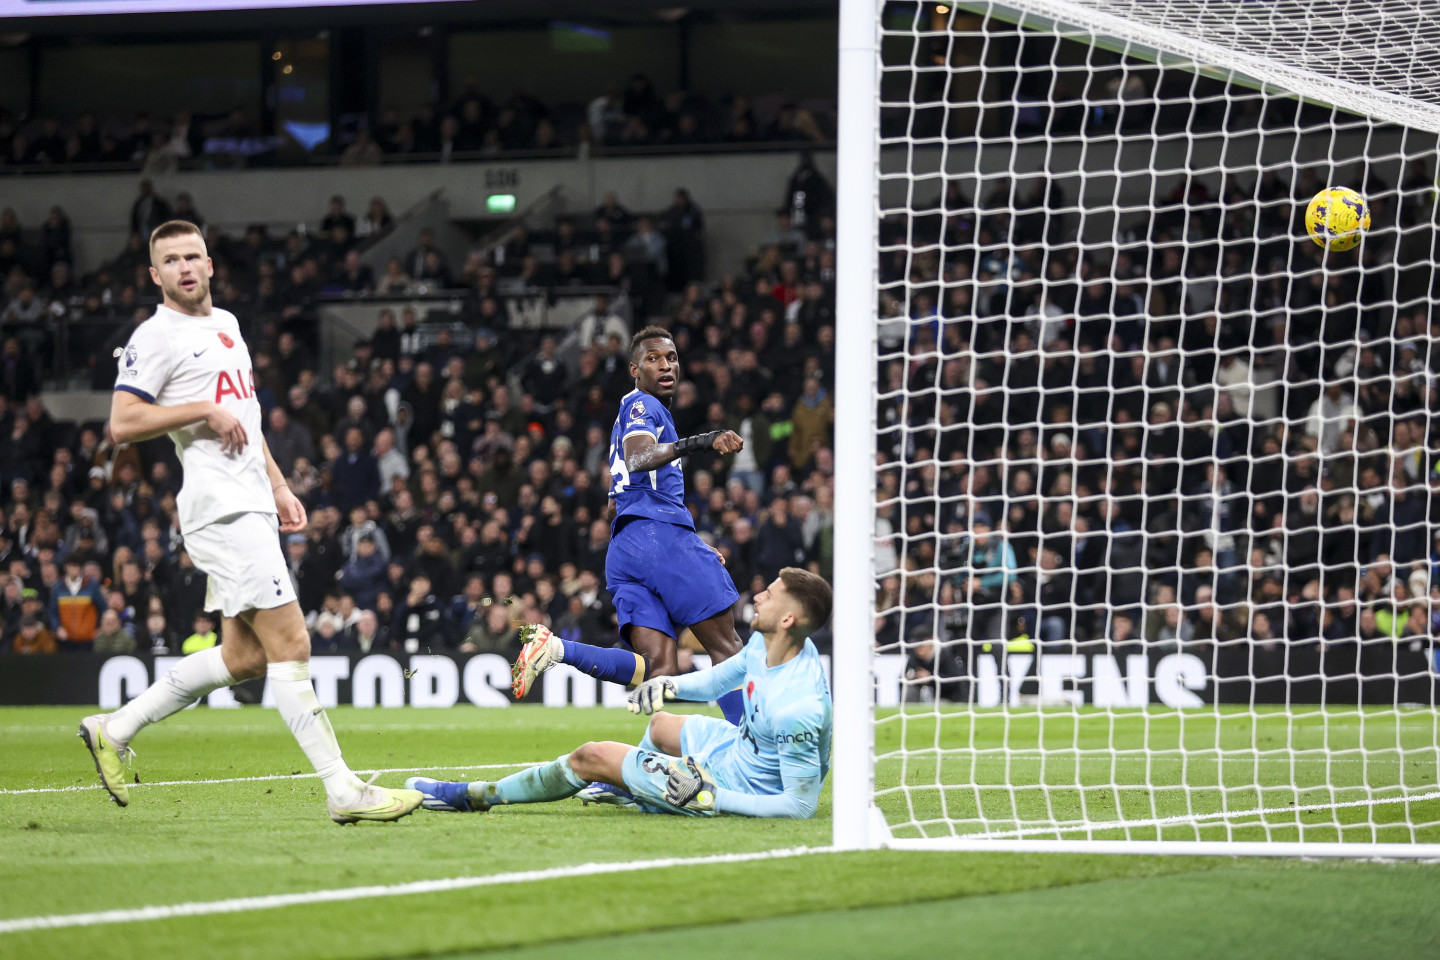 Jackson treble fires Chelsea to victory over Spurs